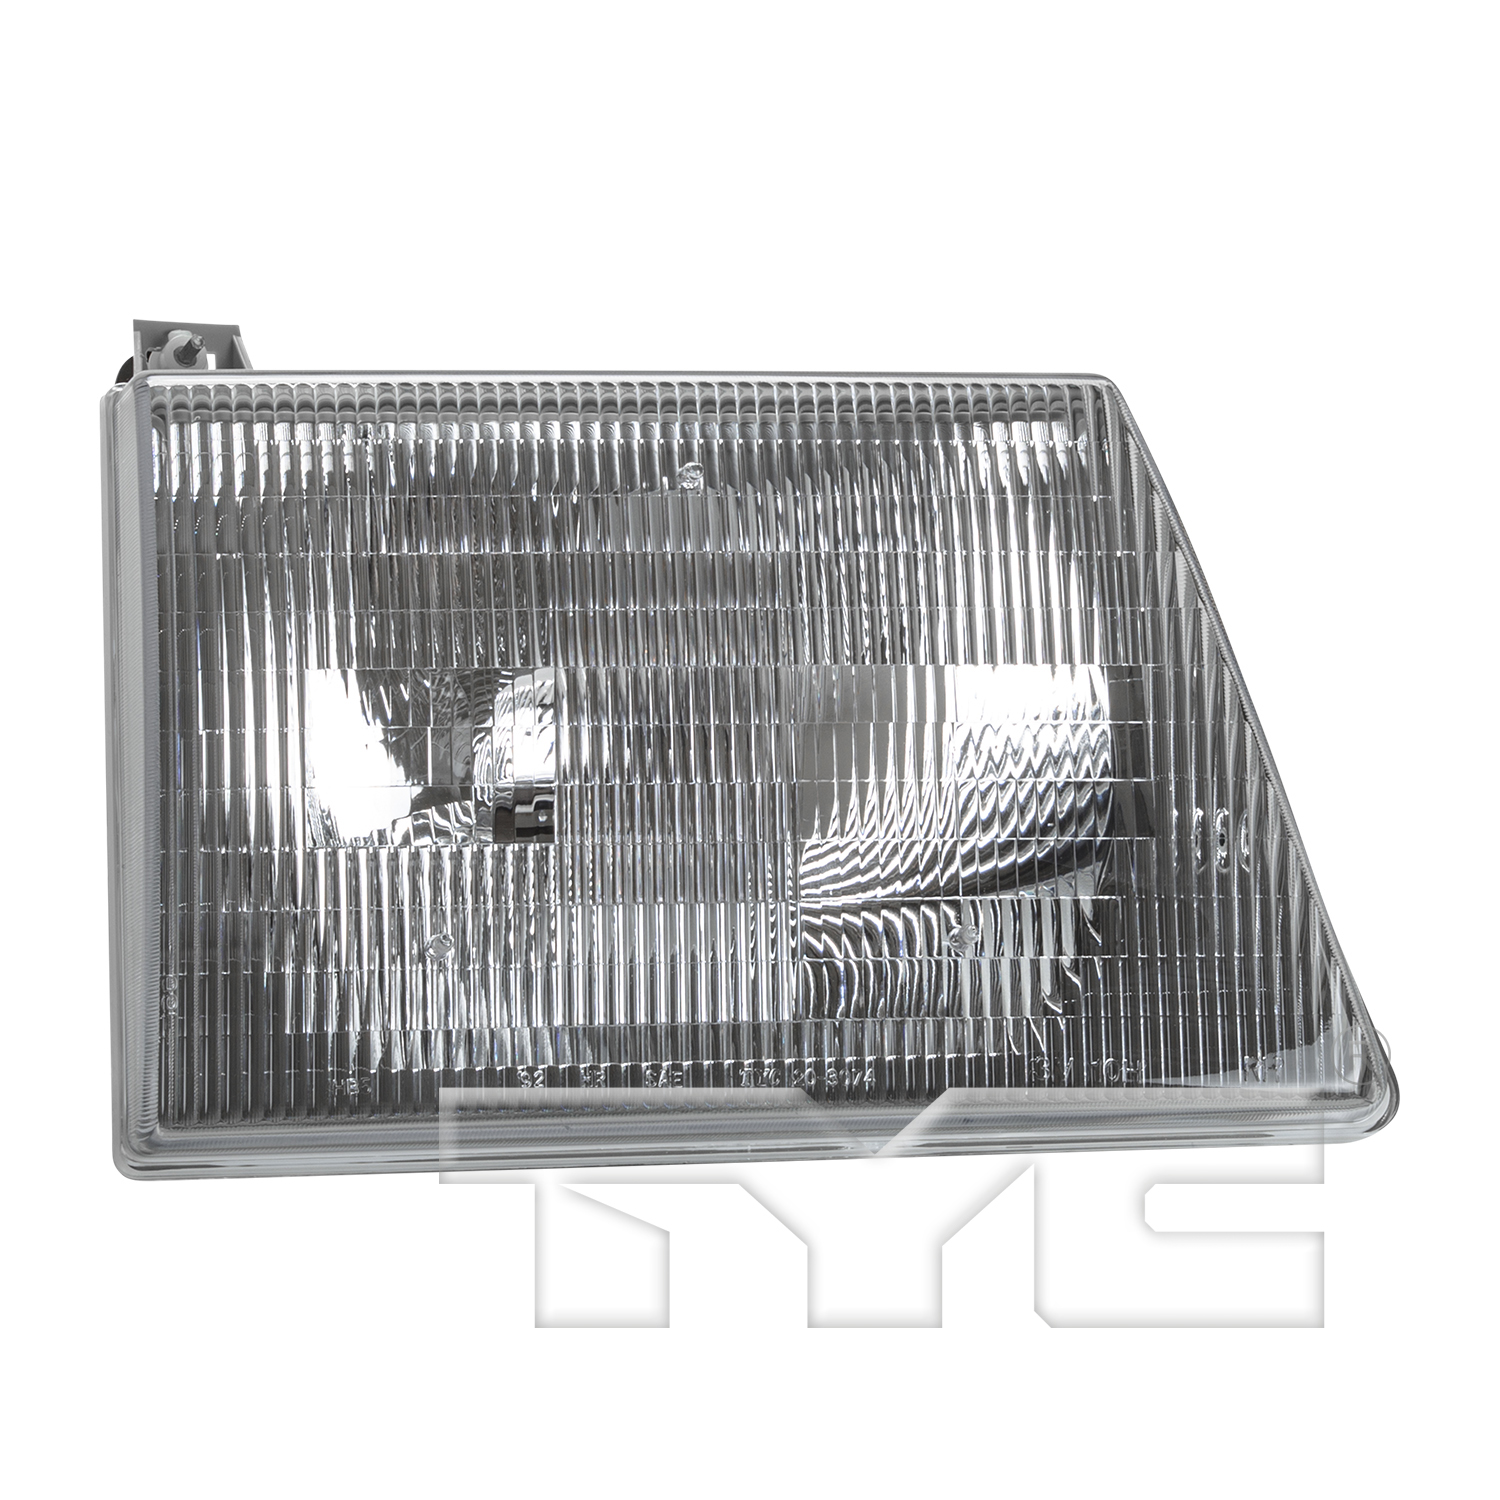 Aftermarket HEADLIGHTS for FORD - E-350 ECONOLINE CLUB WAGON, E-350 ECONOLINE CLUB WAGON,97-02,RT Headlamp assy composite